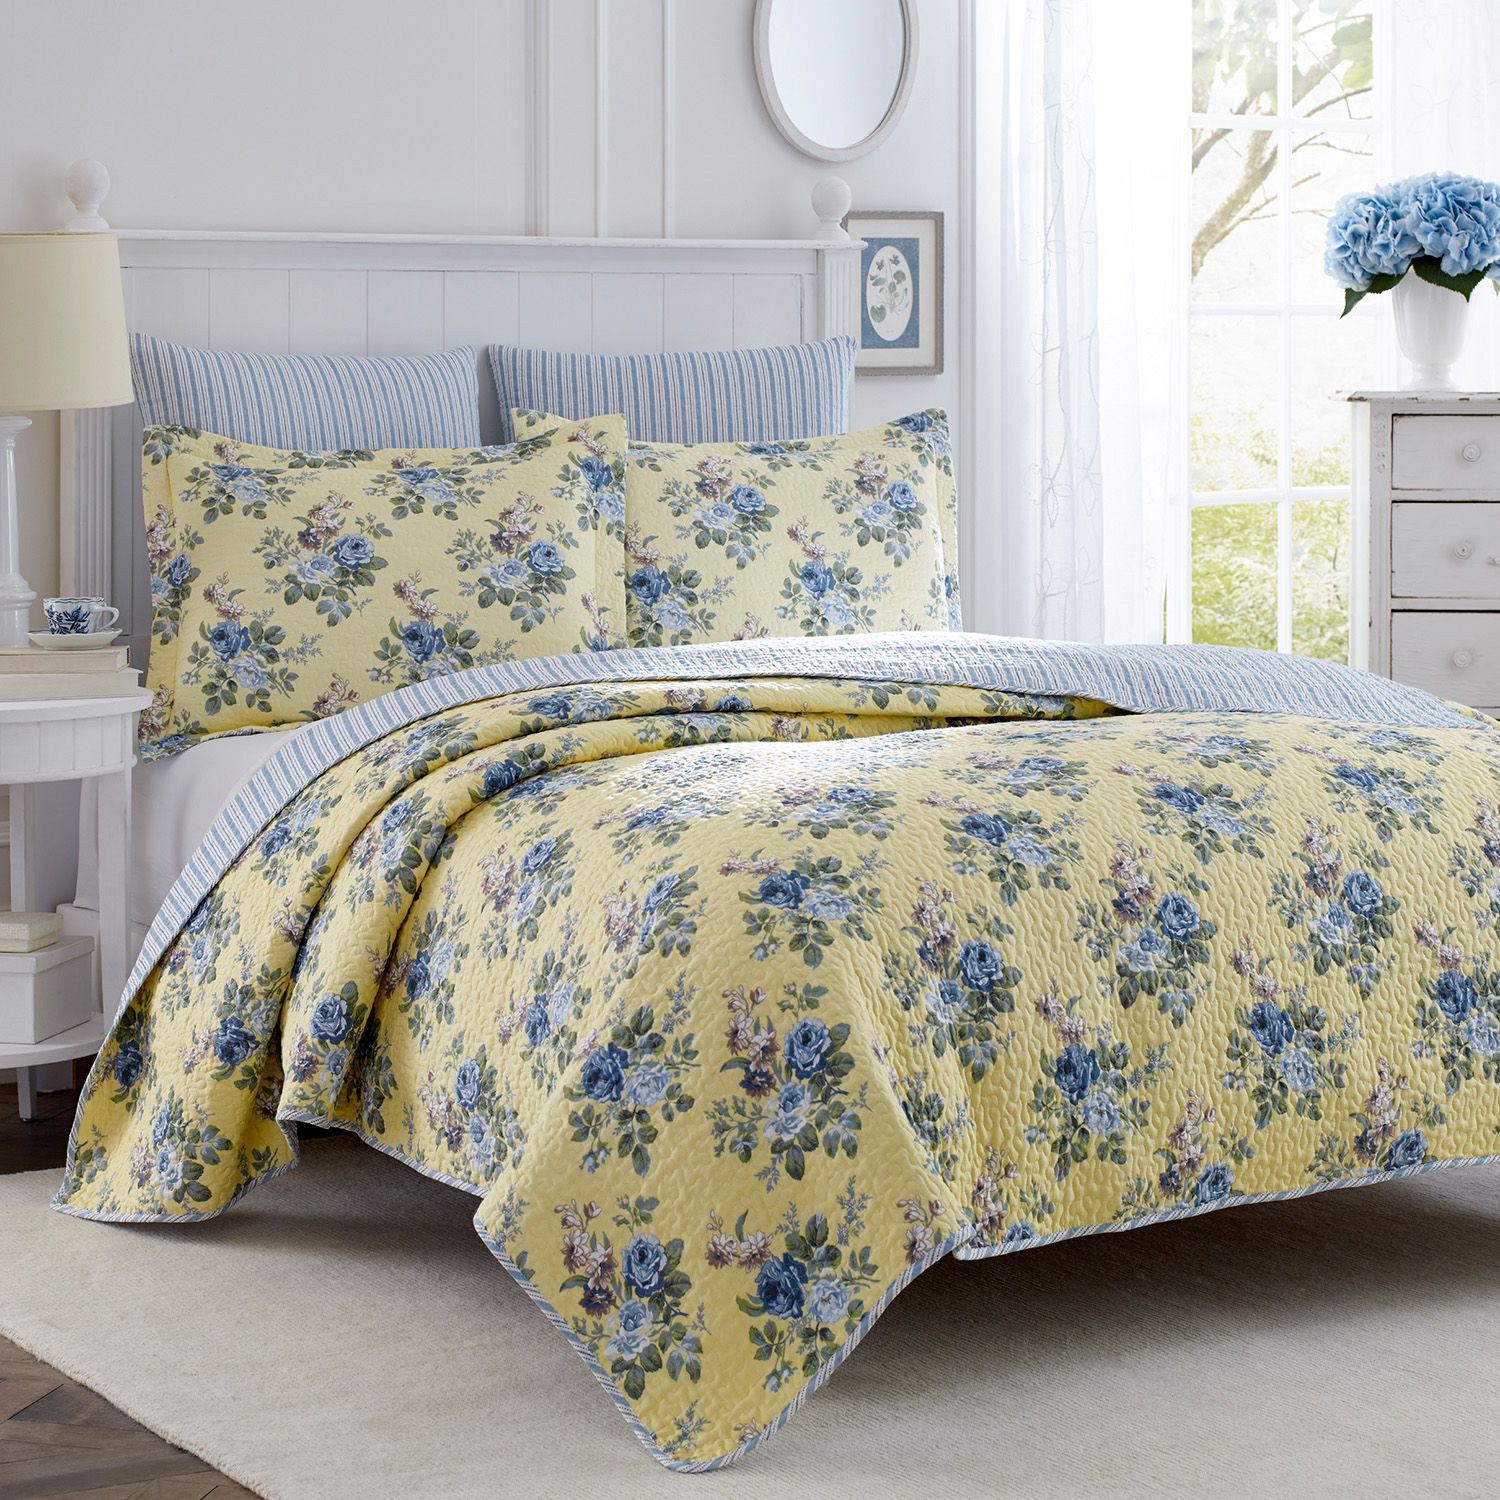 Image for Laura Ashley Lifestyles Linley Floral Quilt Set at Kohl's.